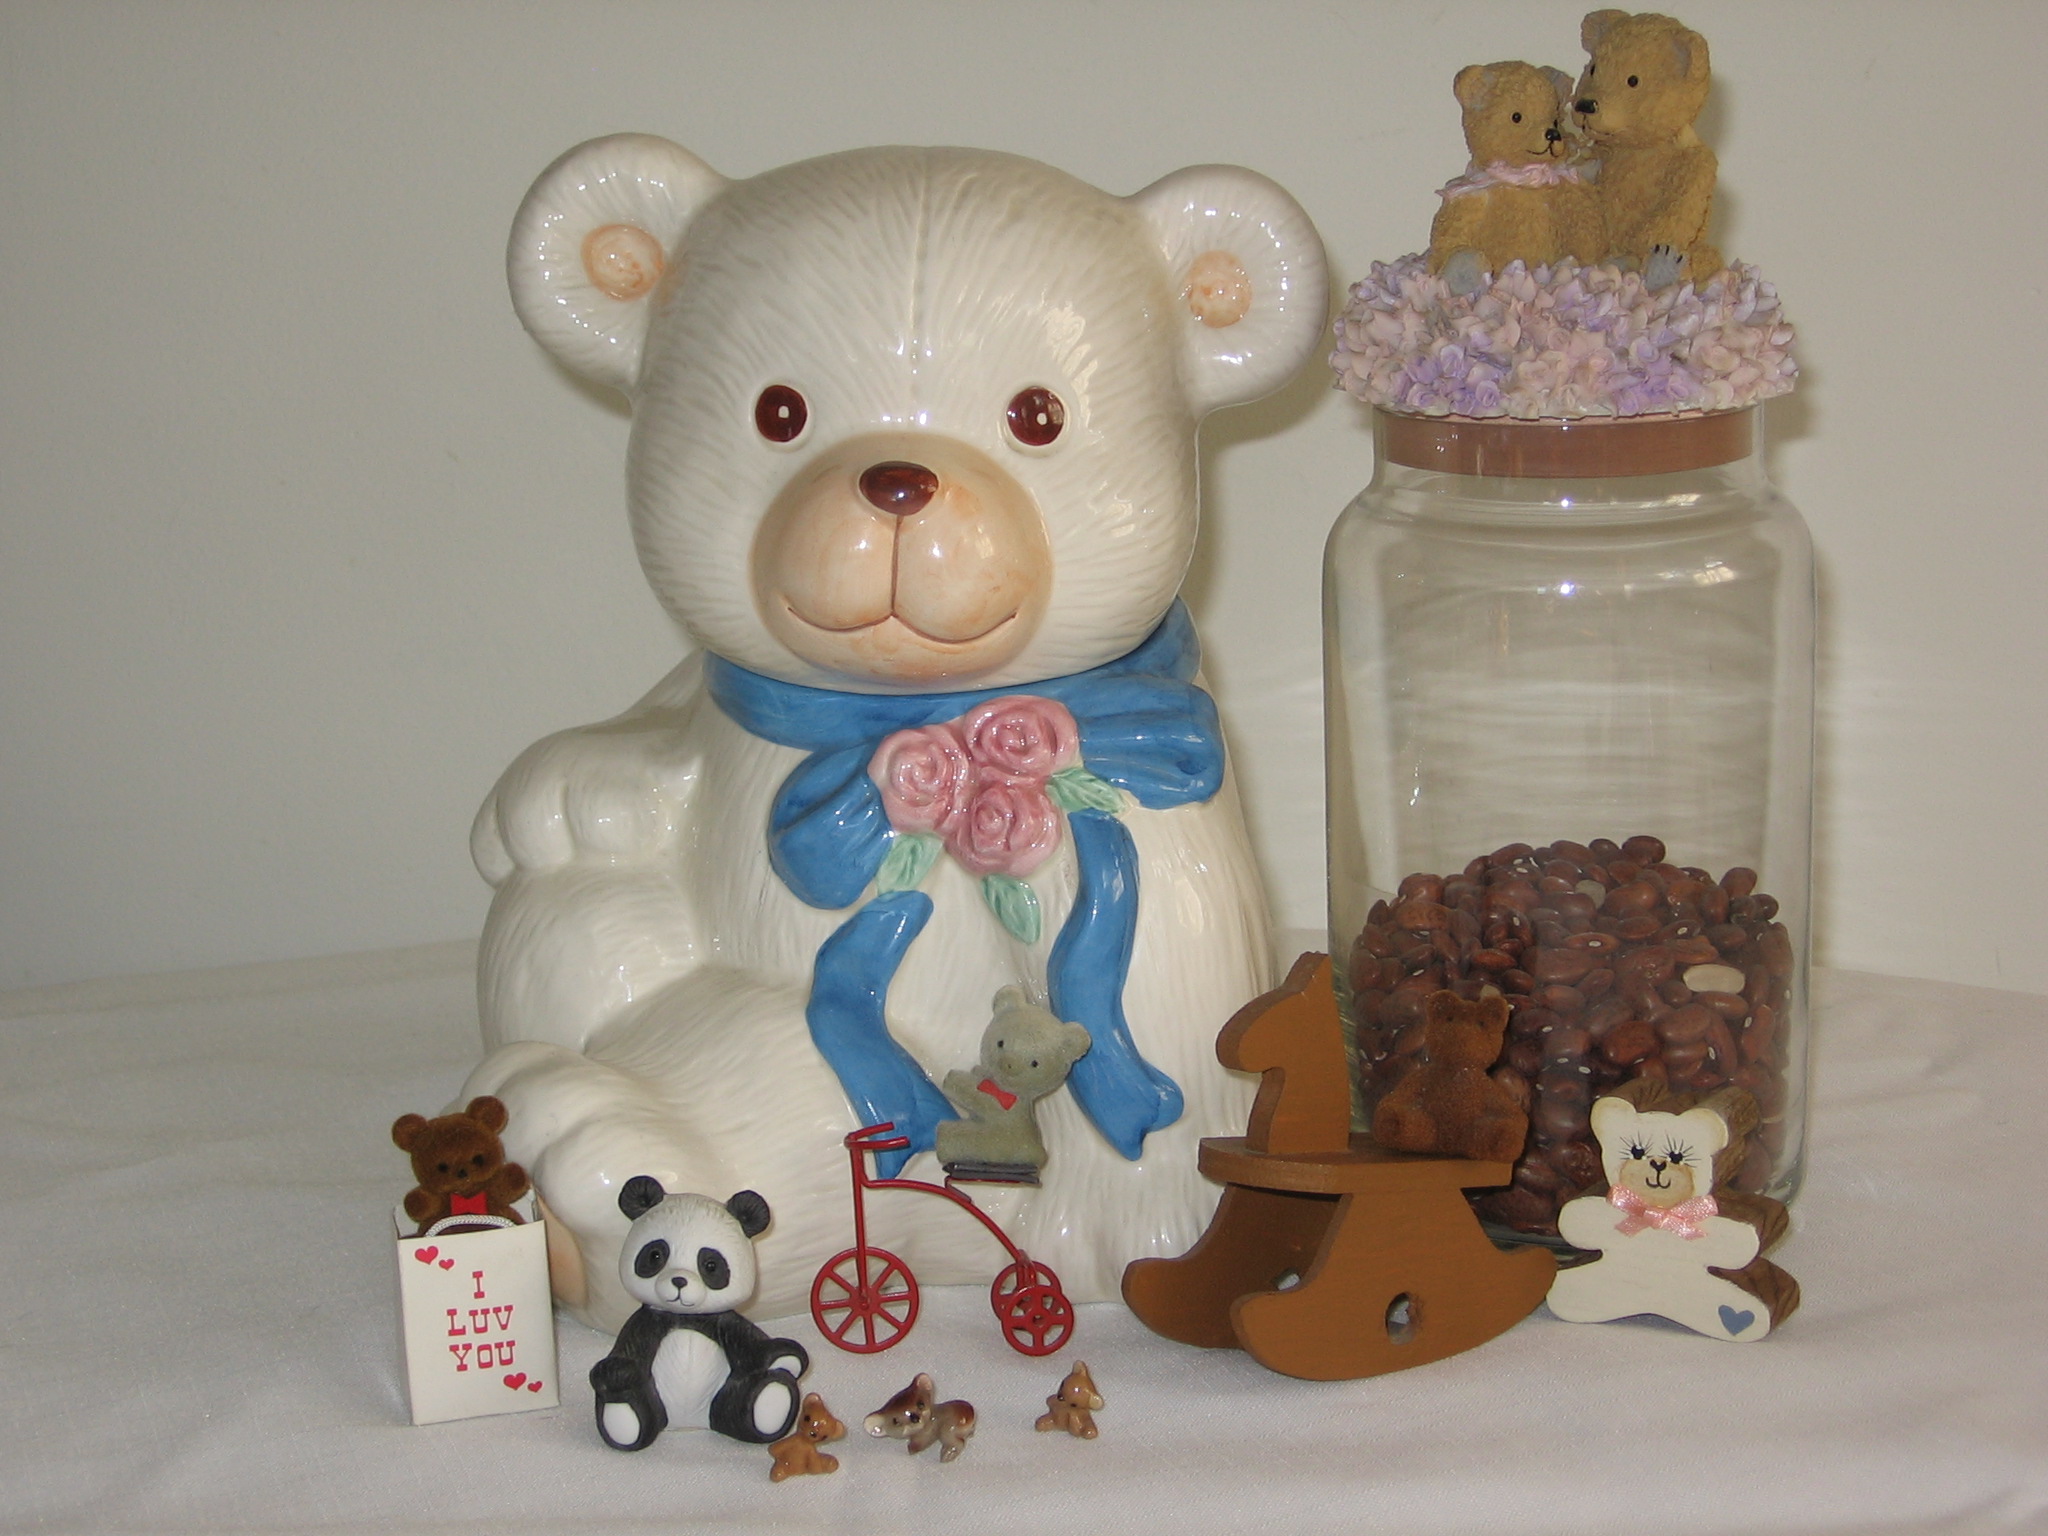 Bear cookie jar and other jars